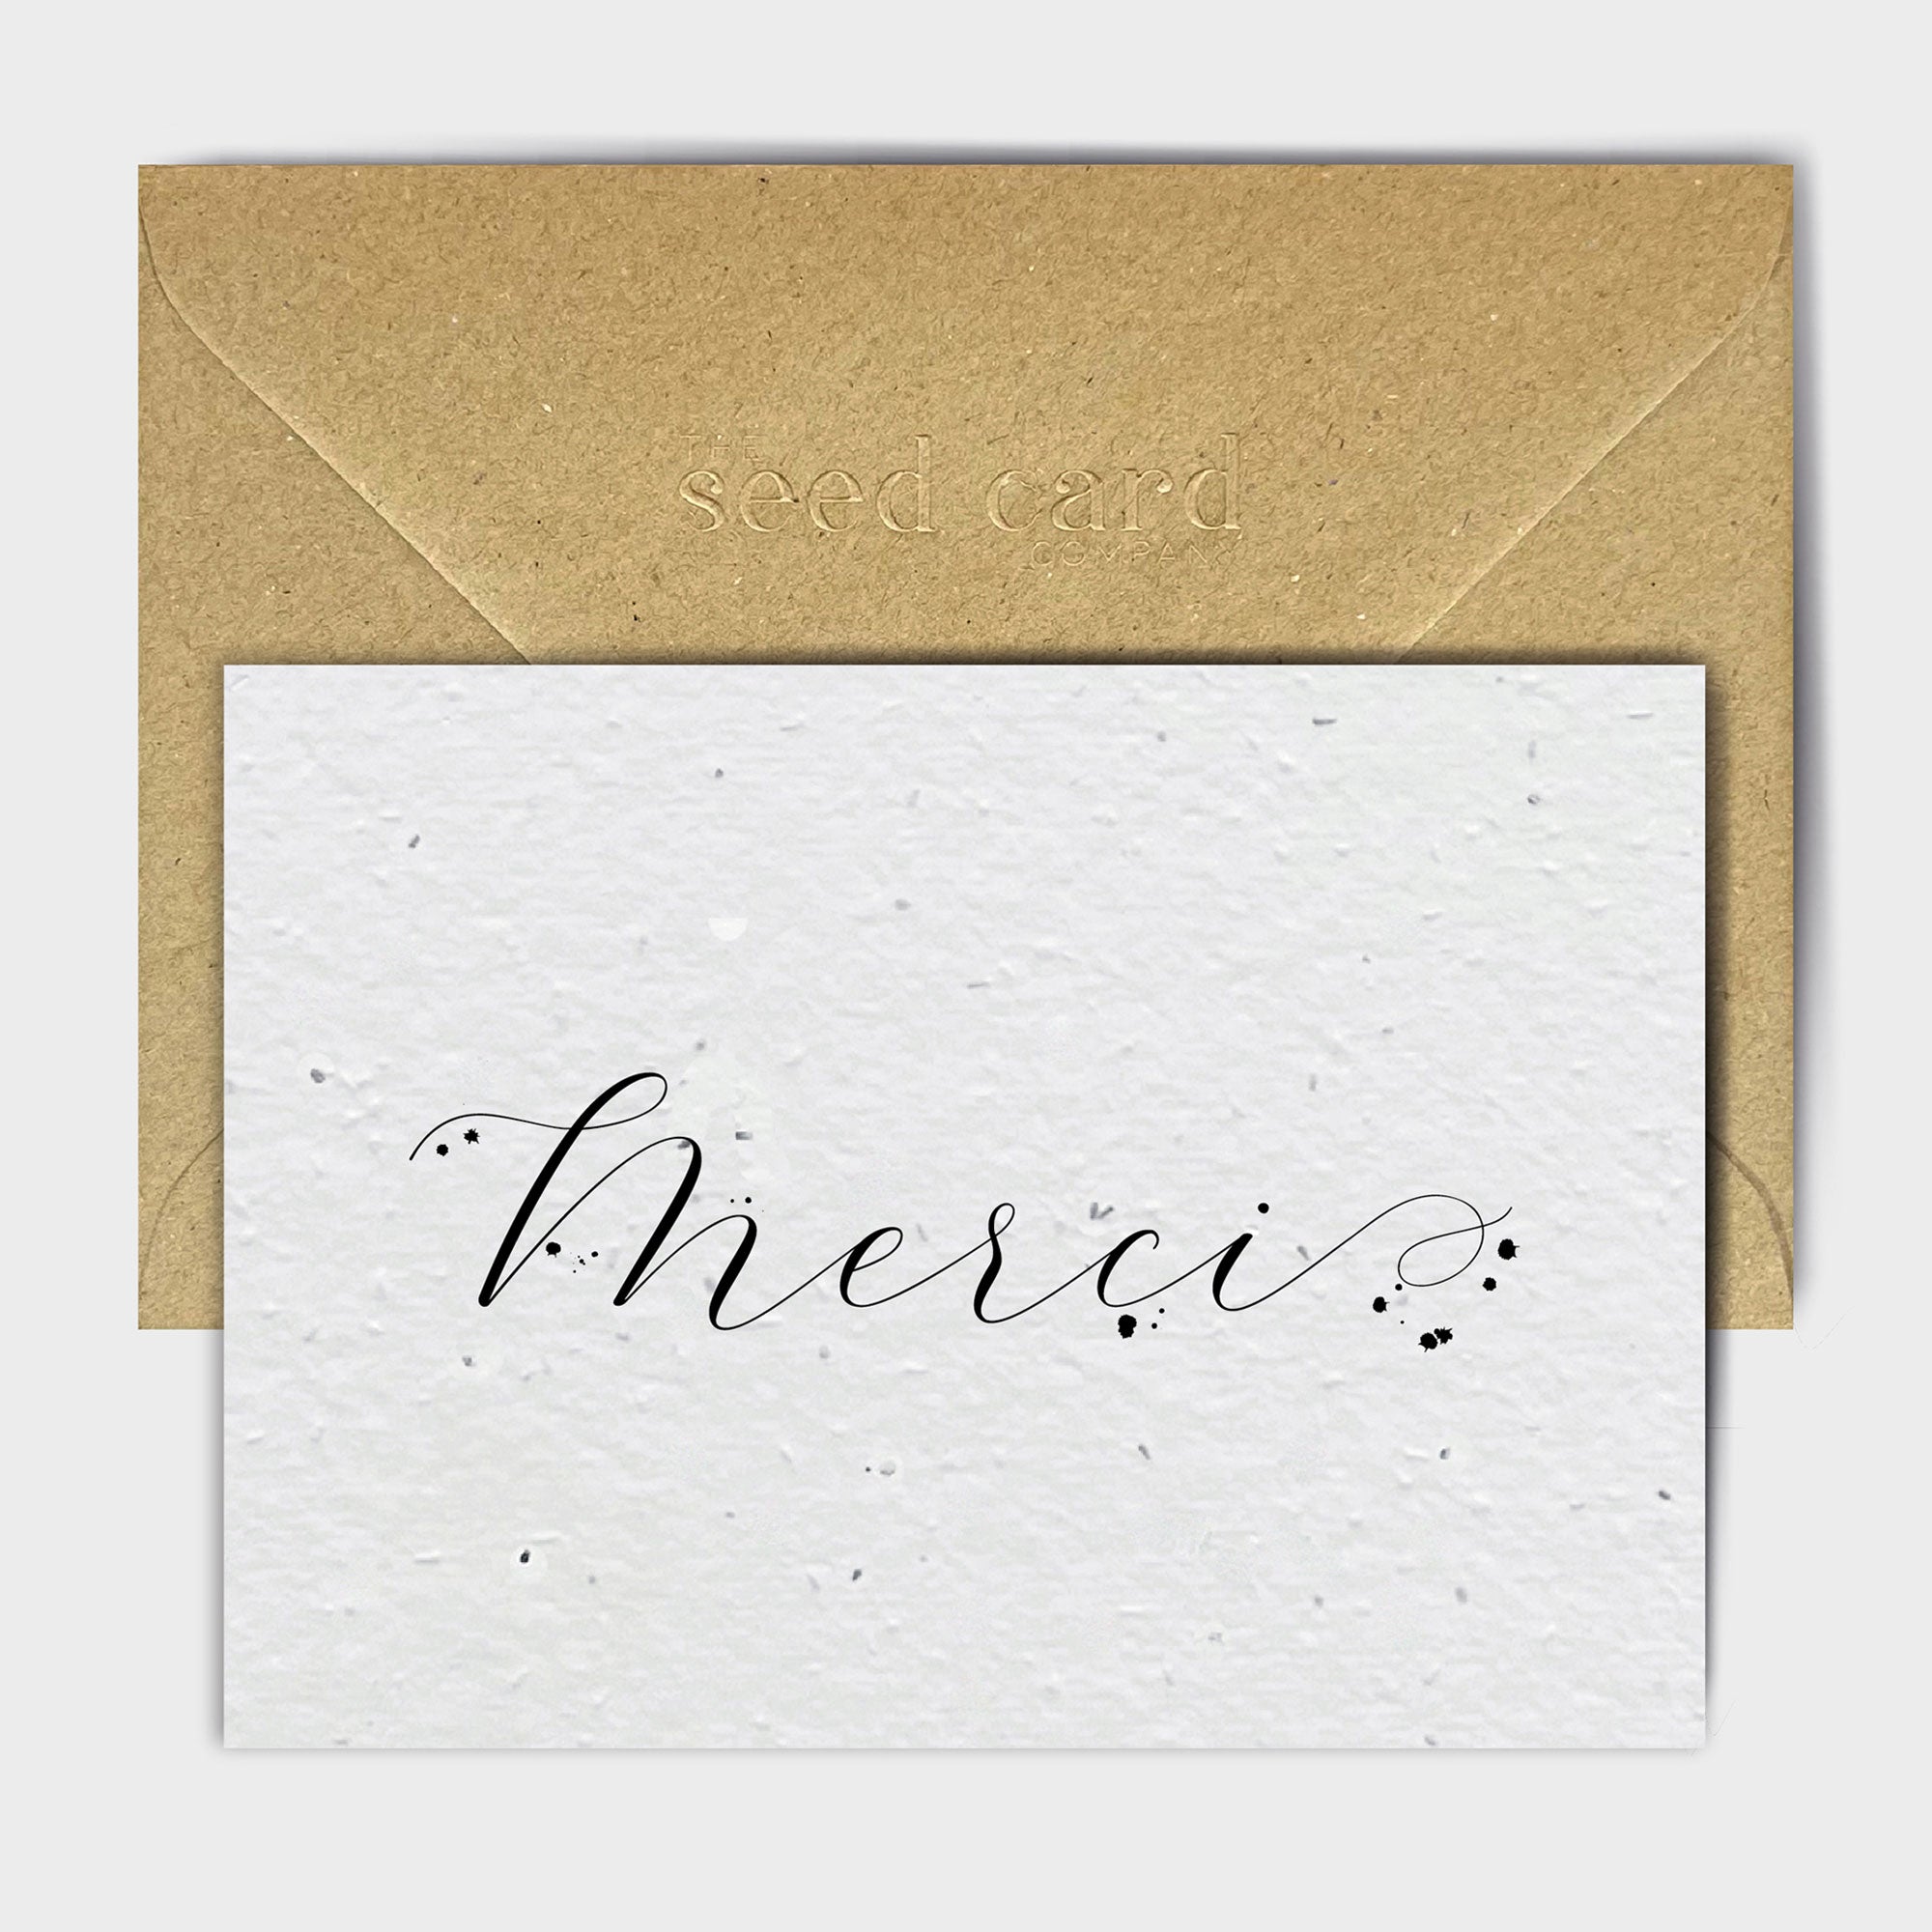 Shop online Merci Merci - 100% biodegradable seed-embedded cards Shop -The Seed Card Company